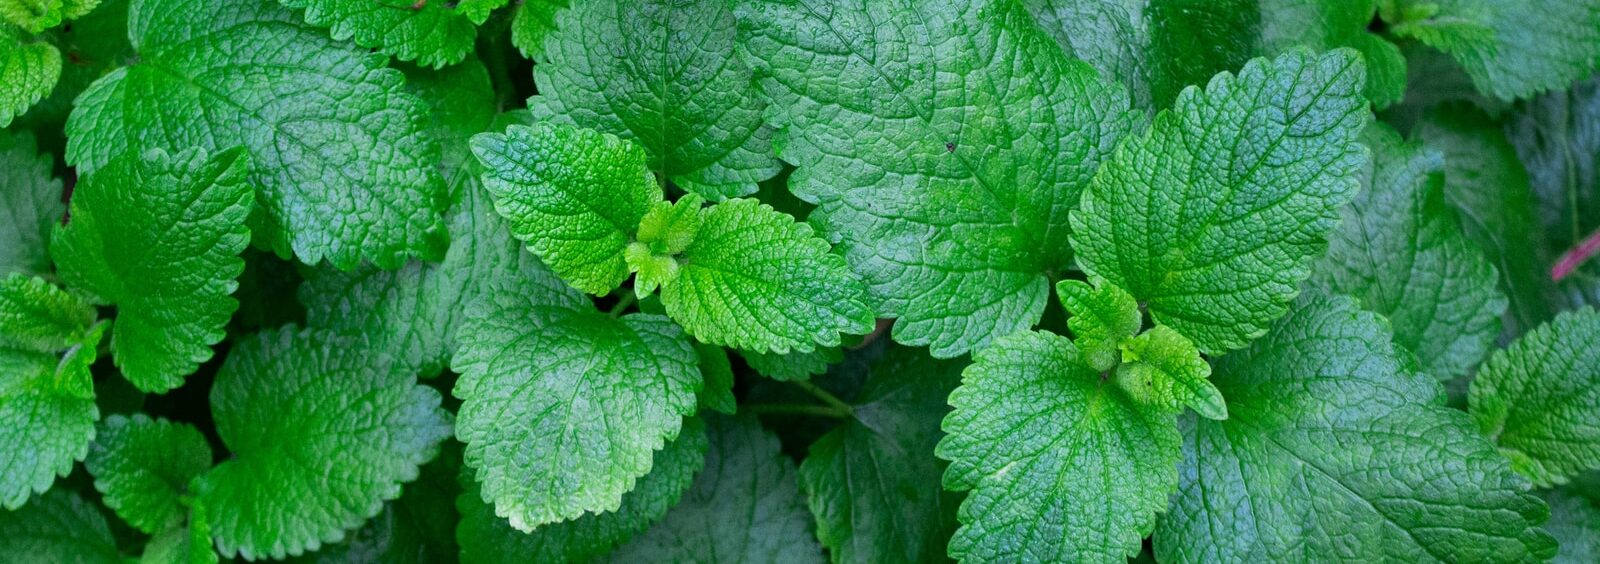 Mint leaves with water droplets